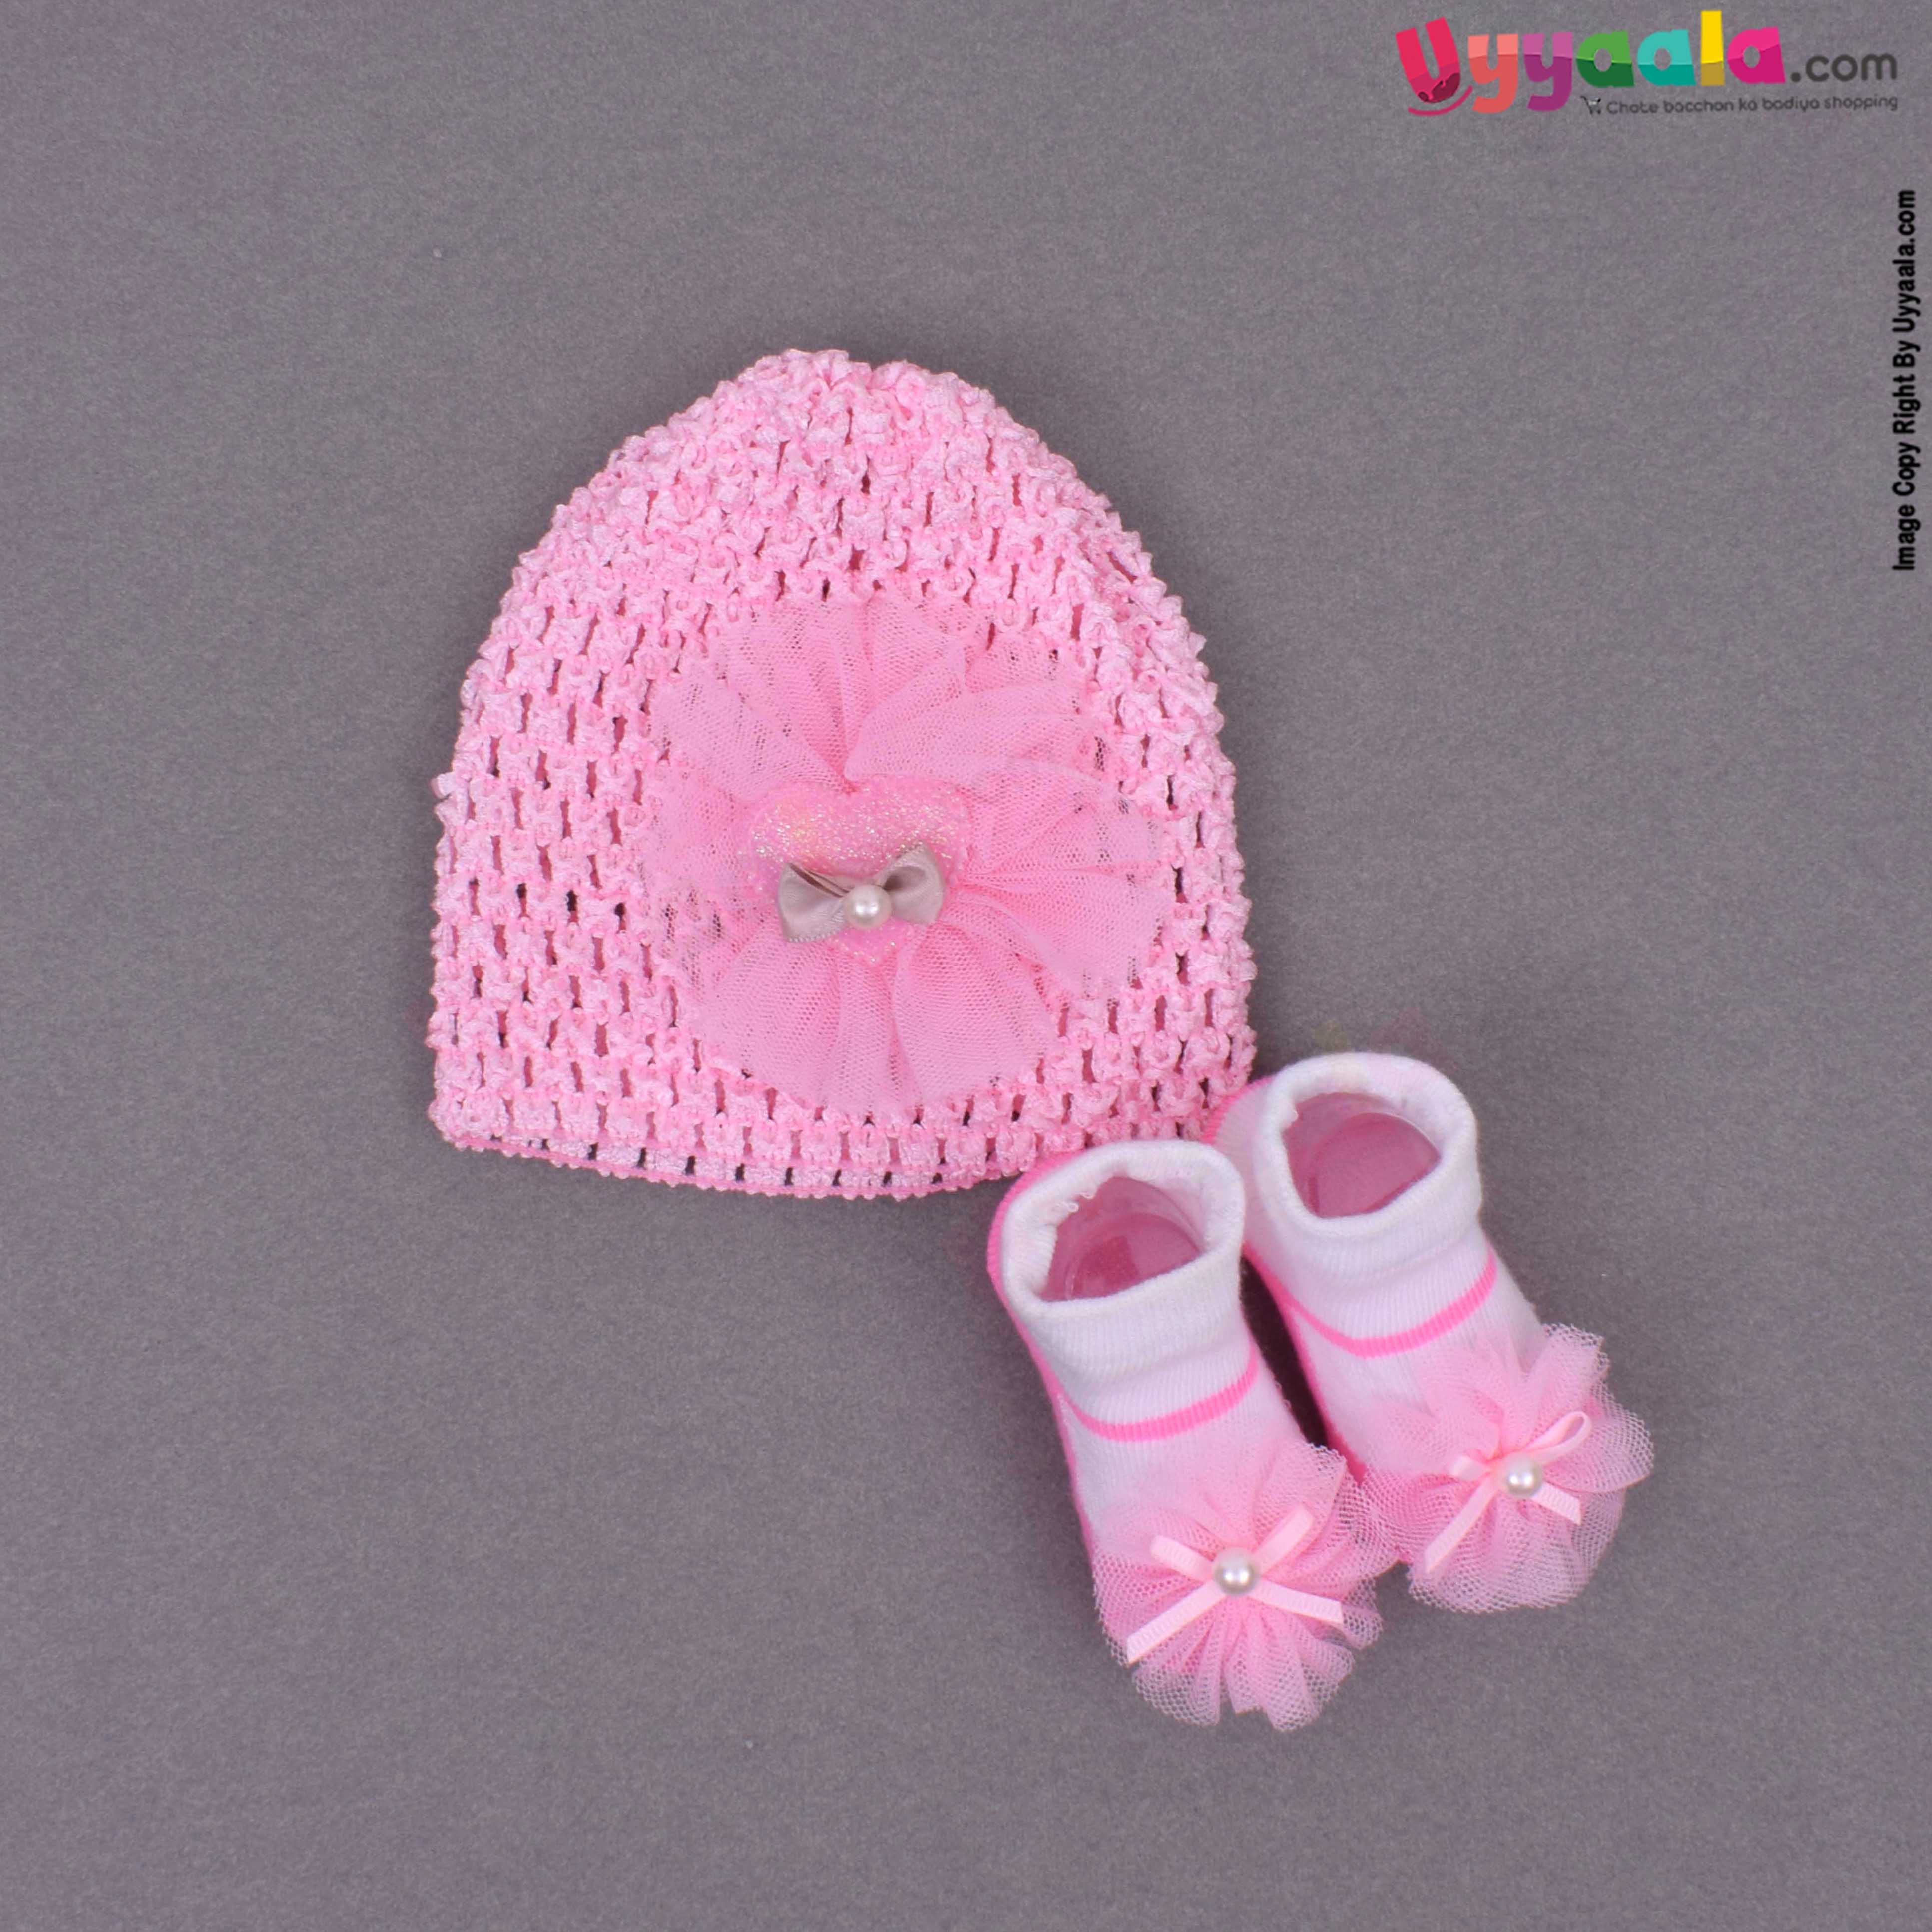 SHINY BABY Accessory set for kids with cap and socks - pink